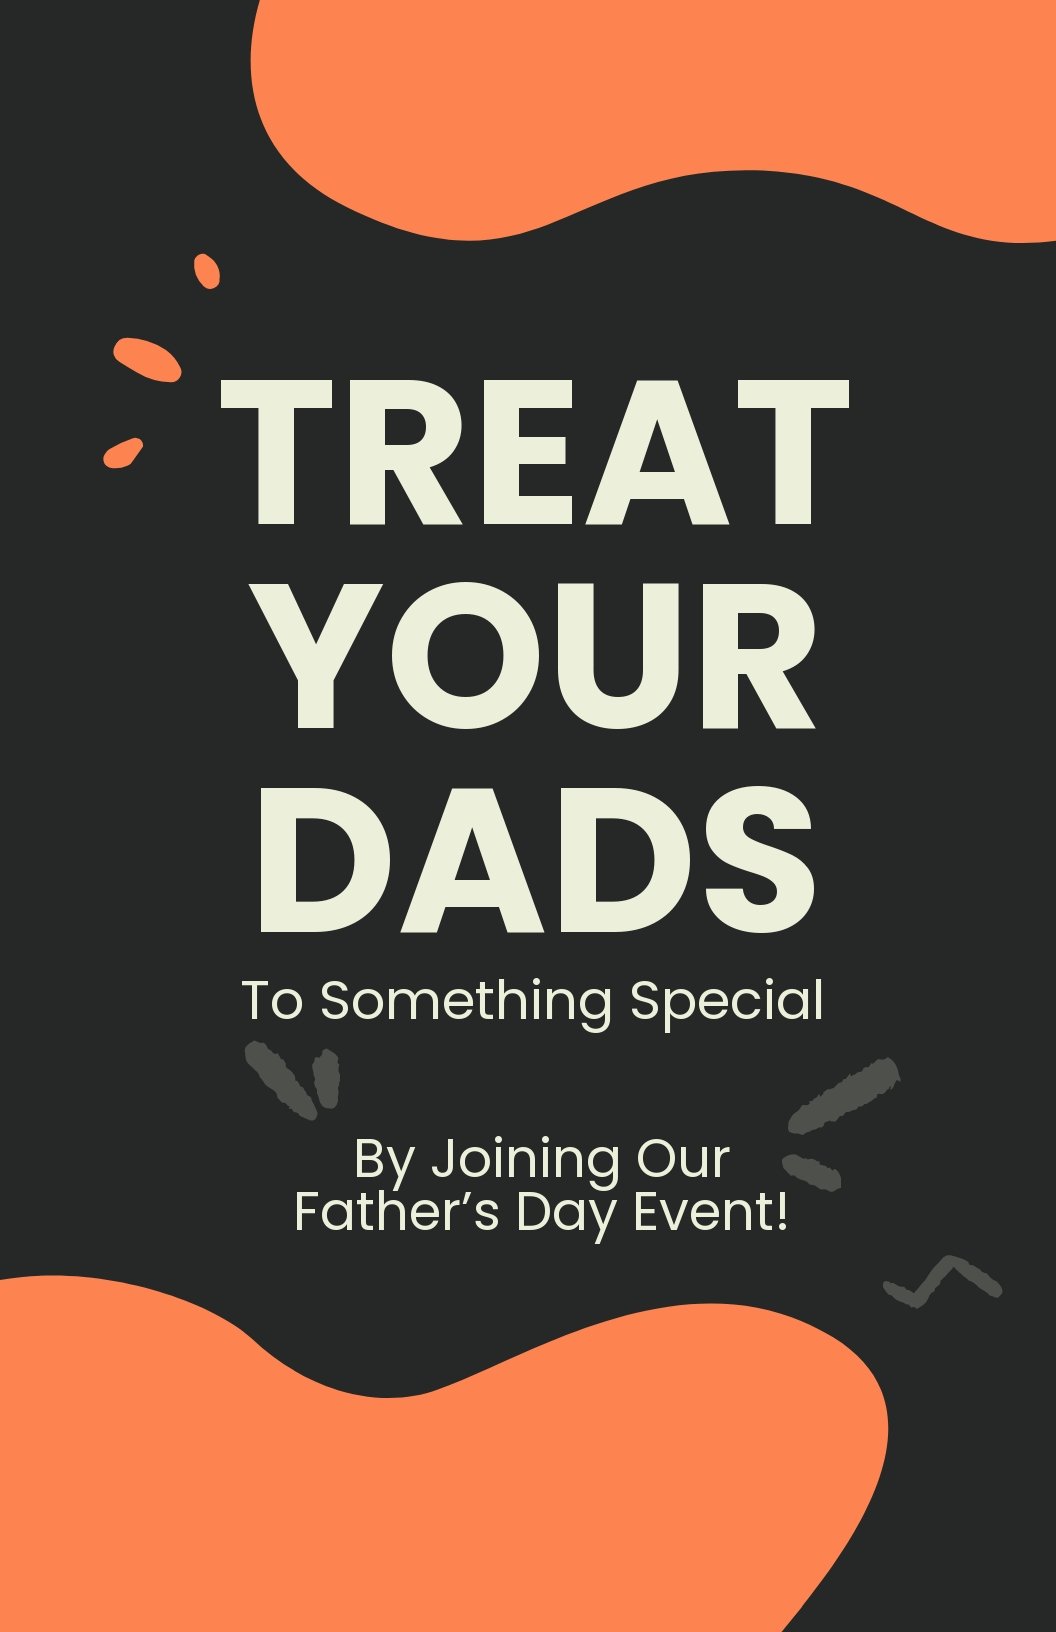 Make Dad's Day Special with a Father's Day Cake Poster!